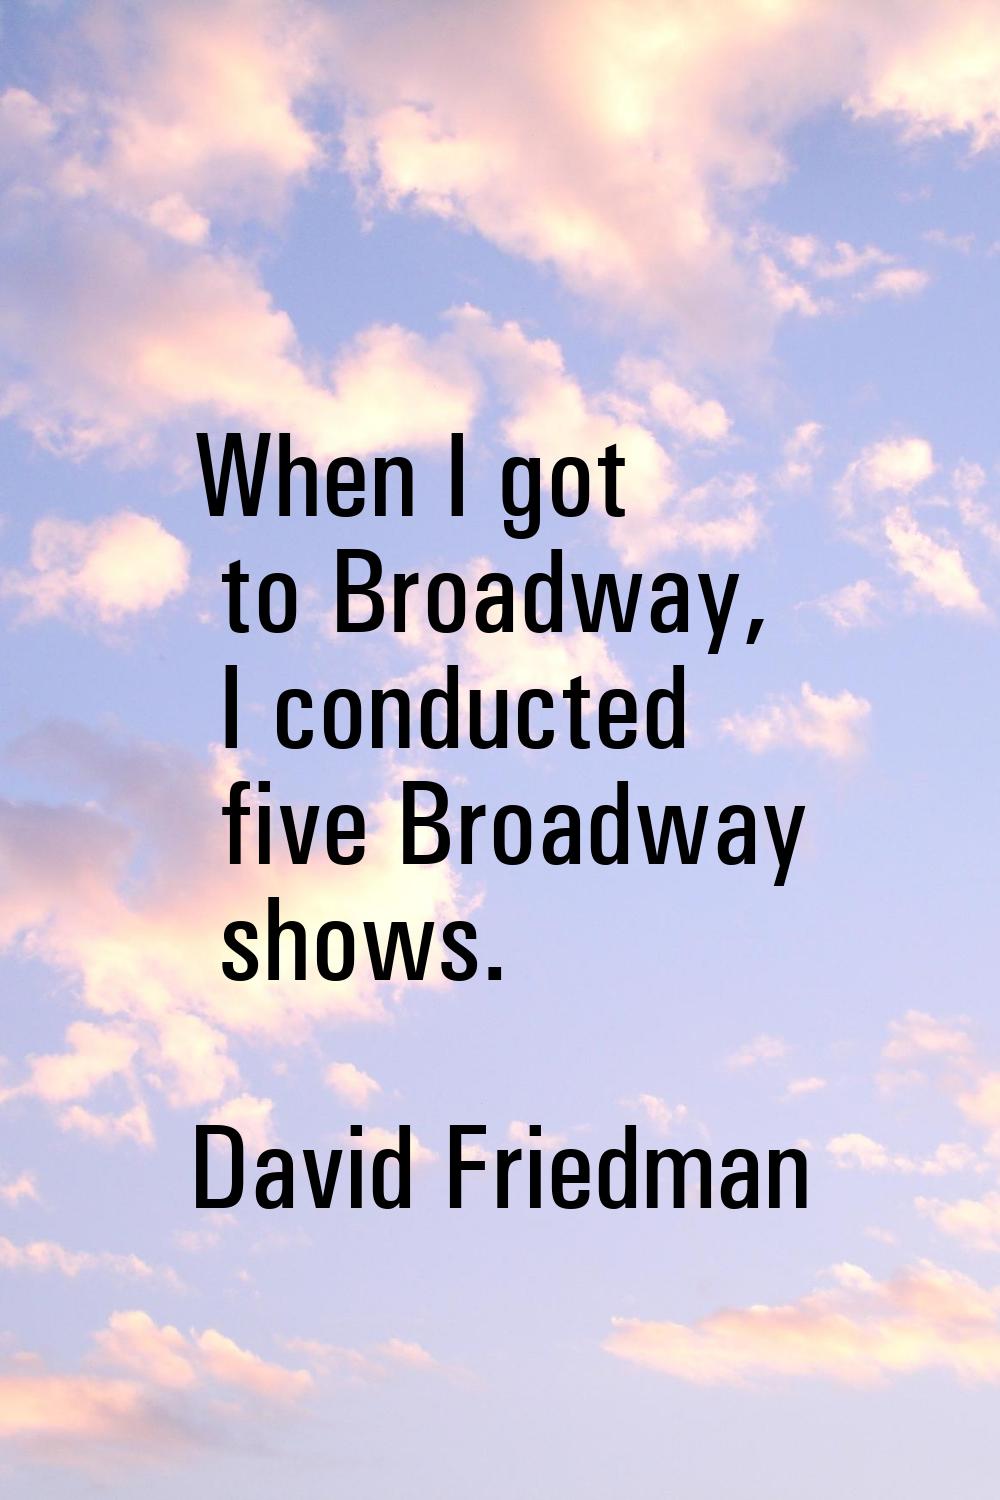 When I got to Broadway, I conducted five Broadway shows.